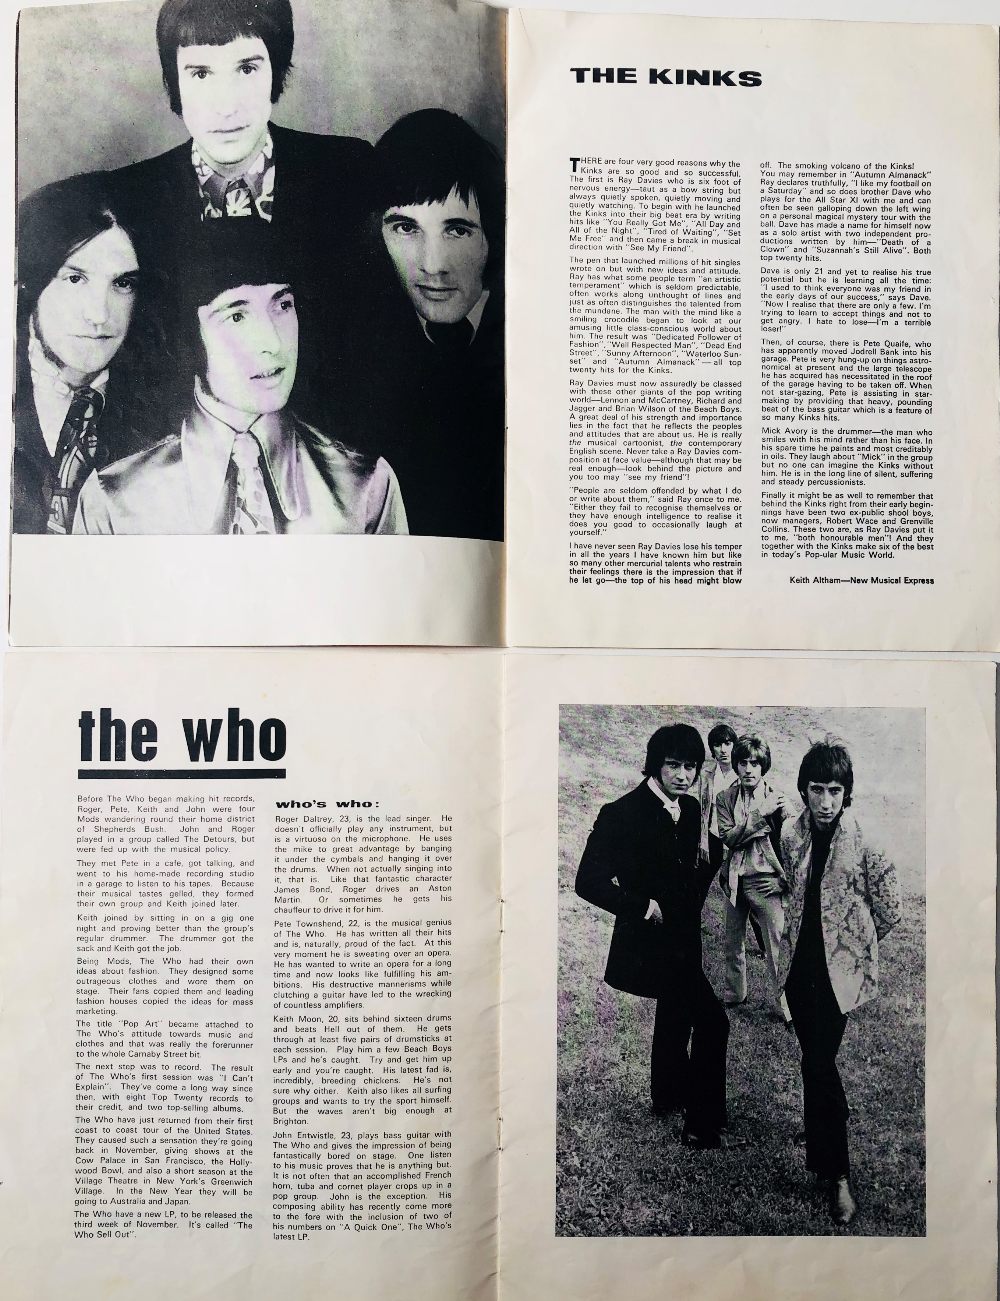 THE WHO 1967 PROGRAMME / THE KINKS PLUS POSTER. - Image 2 of 4